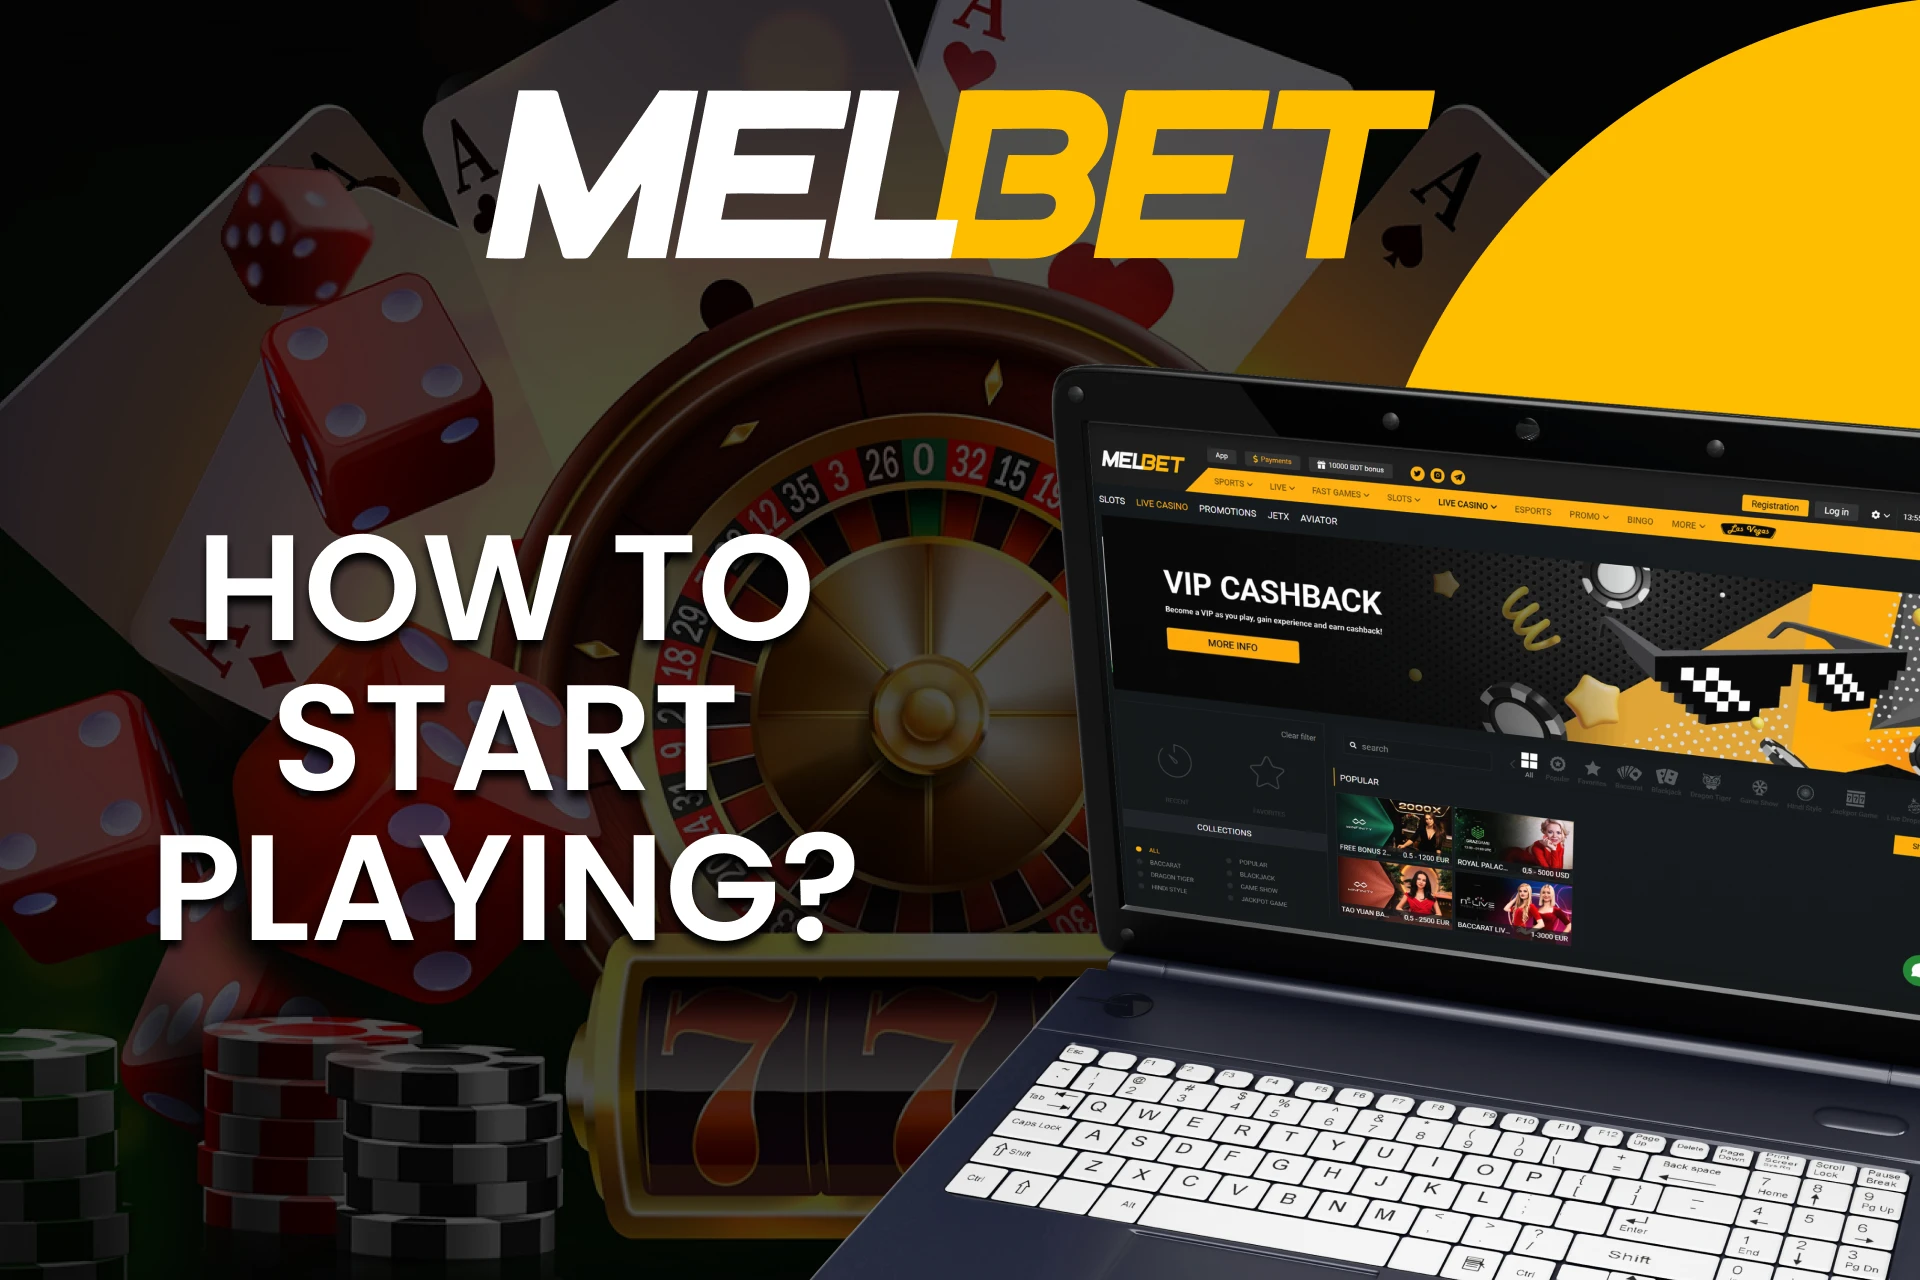 Select the desired section on the Melbet website to play Live Casino.